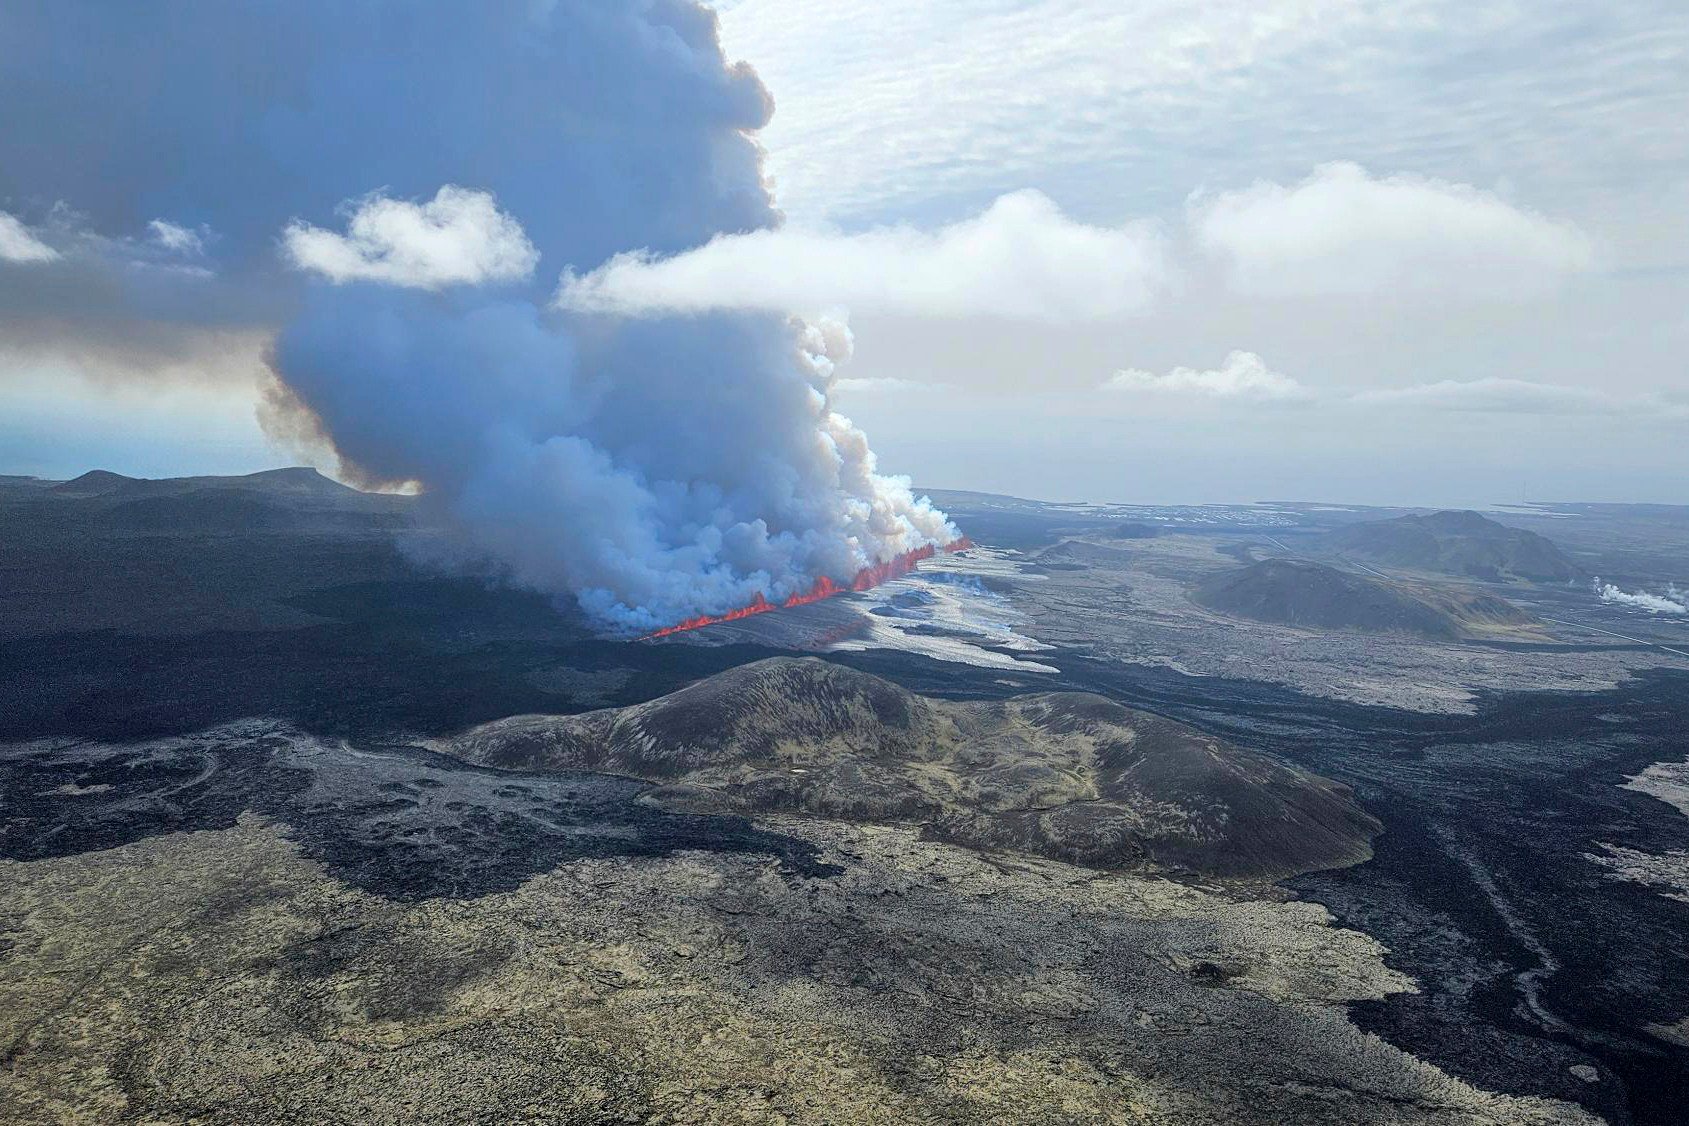 A volcano in southwestern Iceland is erupting, spewing red streams of lava in its latest display of nature’s power. Photo: Iceland Civil Defense via AP